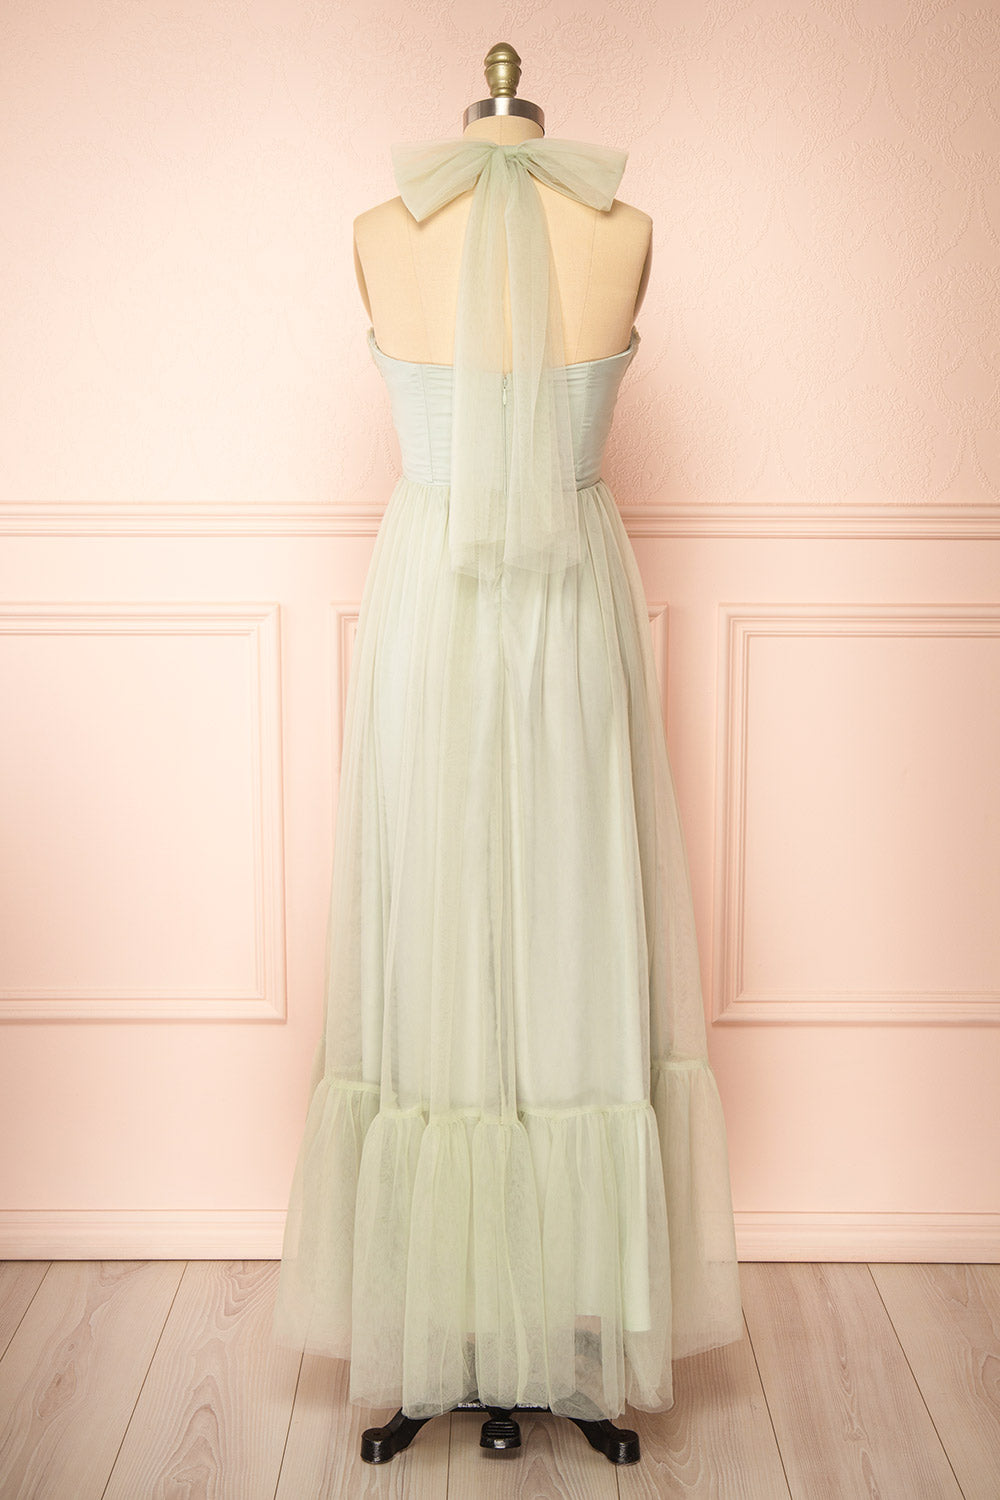 Emberly Sage Tulle Dress w/ Halter Neck | Boutique 1861 back view